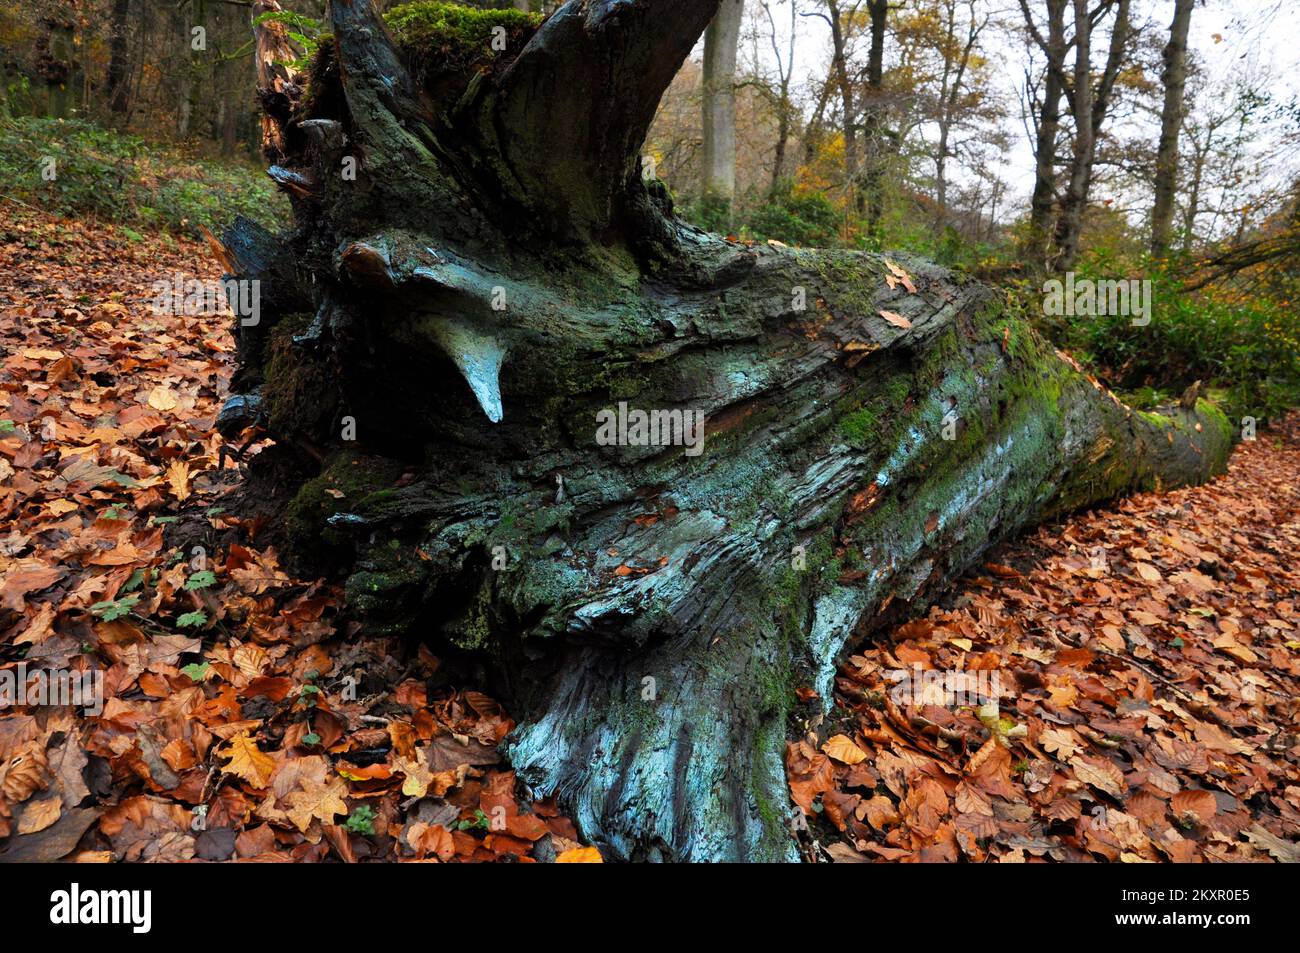 The rotting trunk of a fallen tree among the autumn leaves of a Somerset wood. Stock Photo